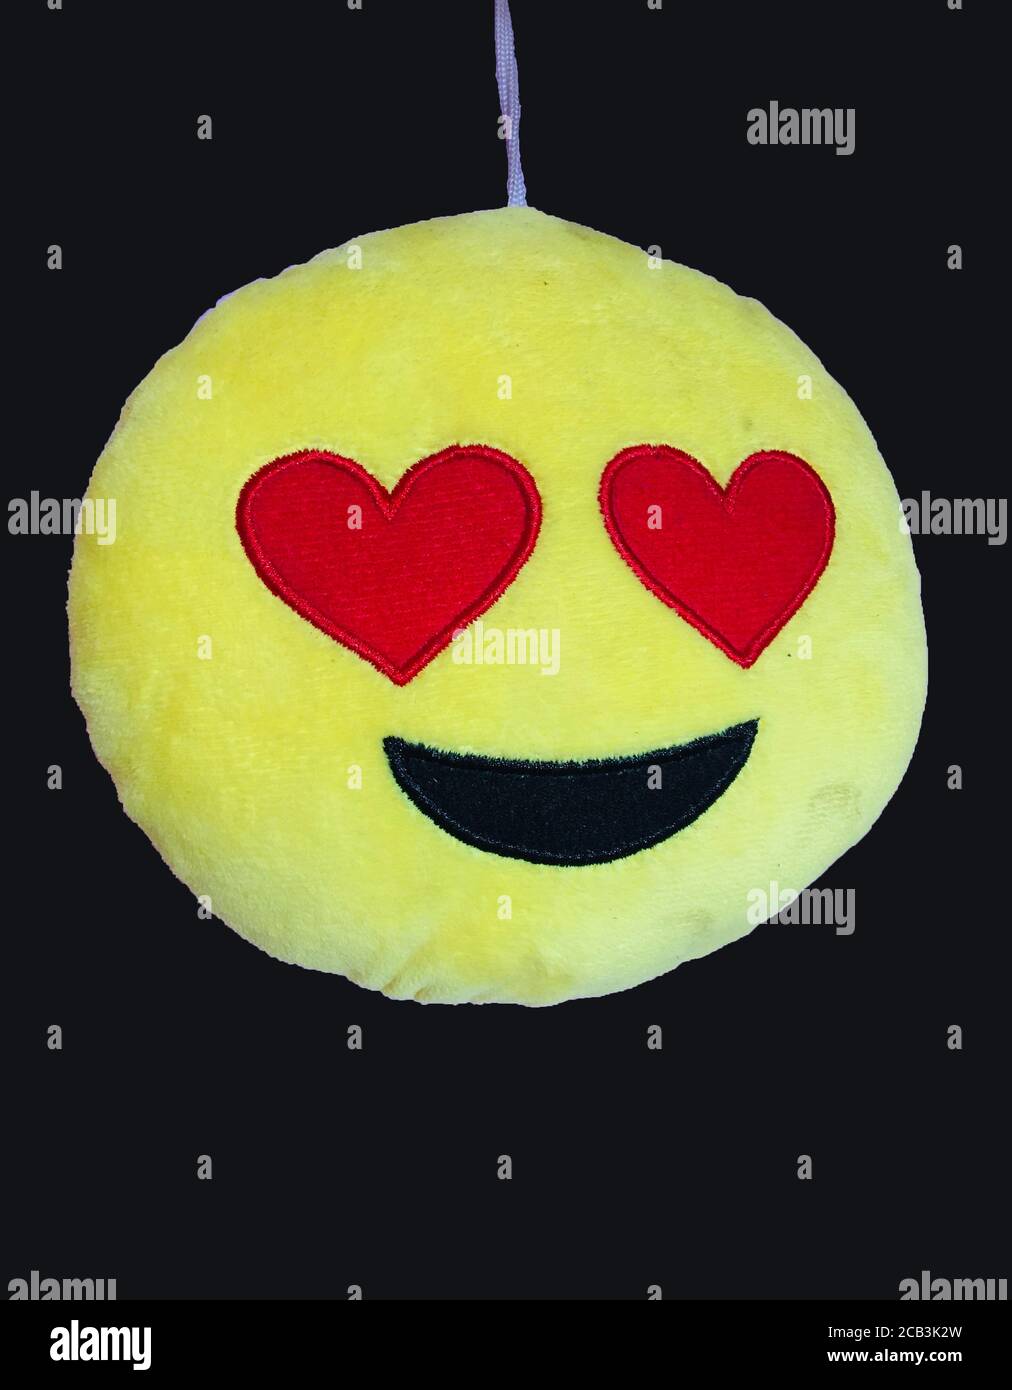 Smily Emoji Pillow with red love eye in black background. Stock Photo